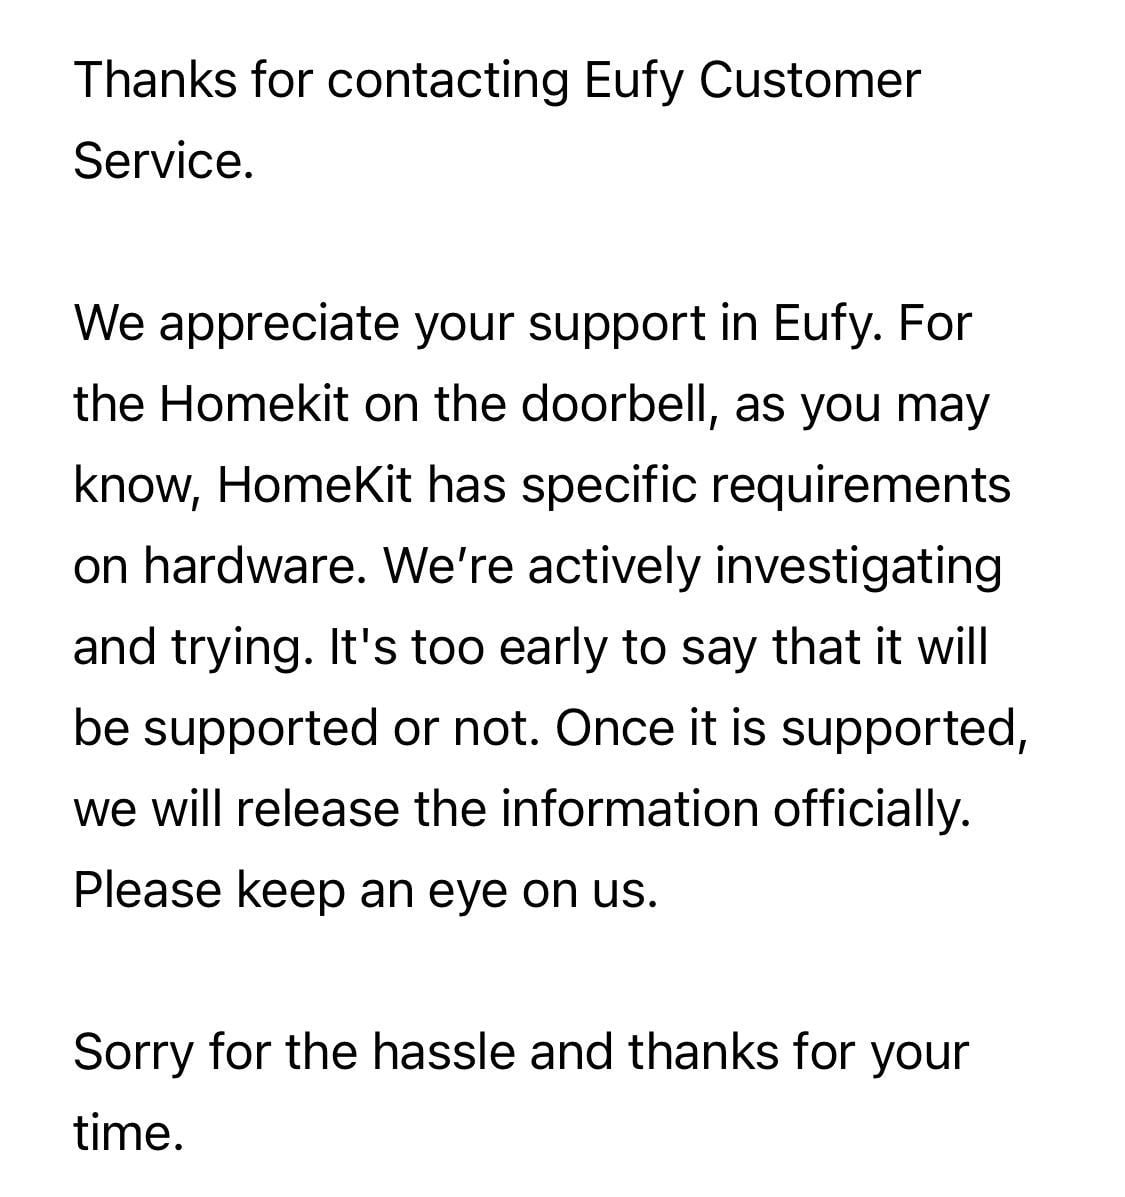 Eufy is still trying to get HK assistance on the